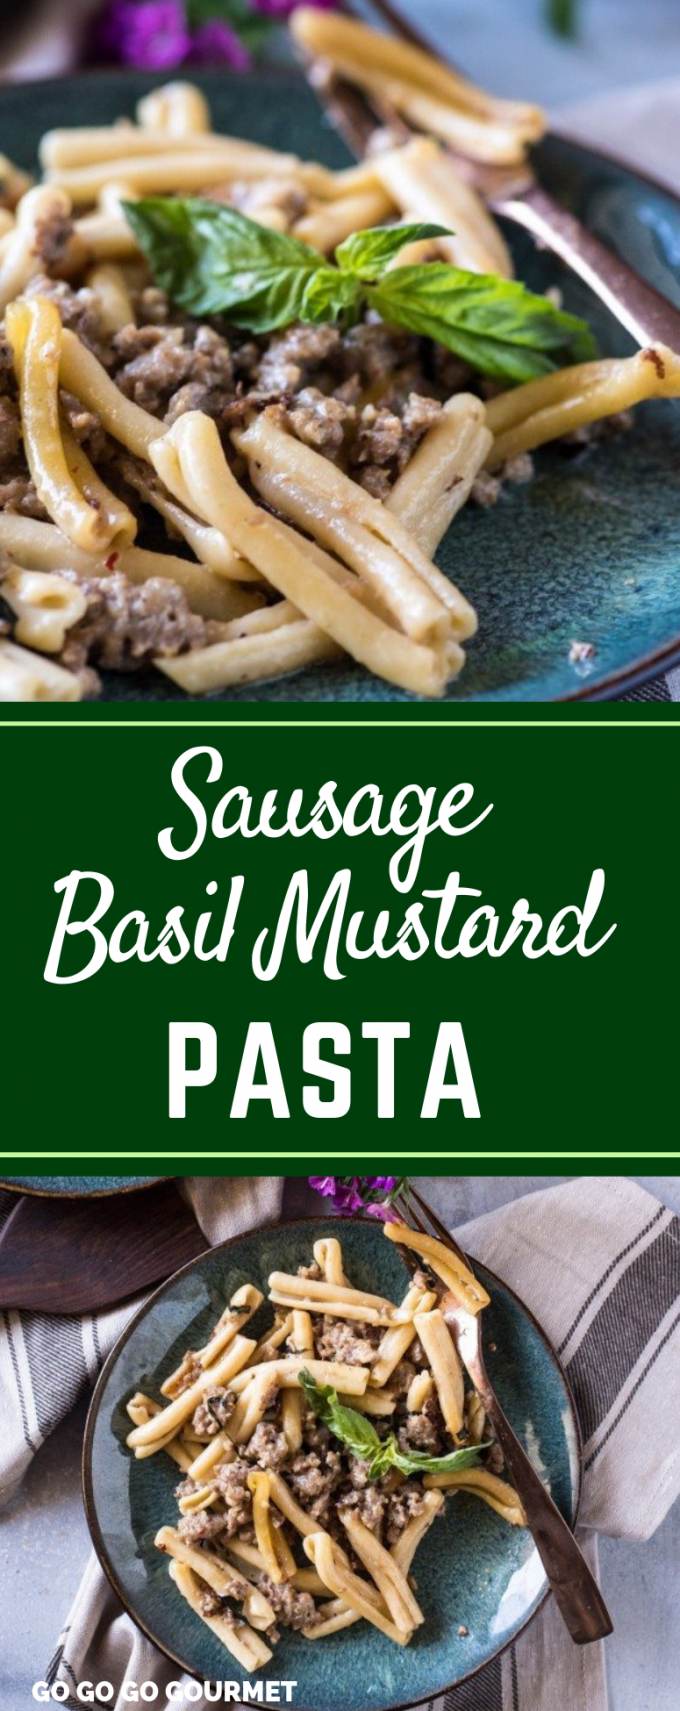 This easy Pasta with Sausage, Basil & Mustard is one of my favorite pasta recipes! Italian pasta dishes don't get any easier or more flavorful than this delicious recipe! #gogogogourmet #pastawithsausage #sausagebasilmustardpasta #easypastarecipes via @gogogogourmet